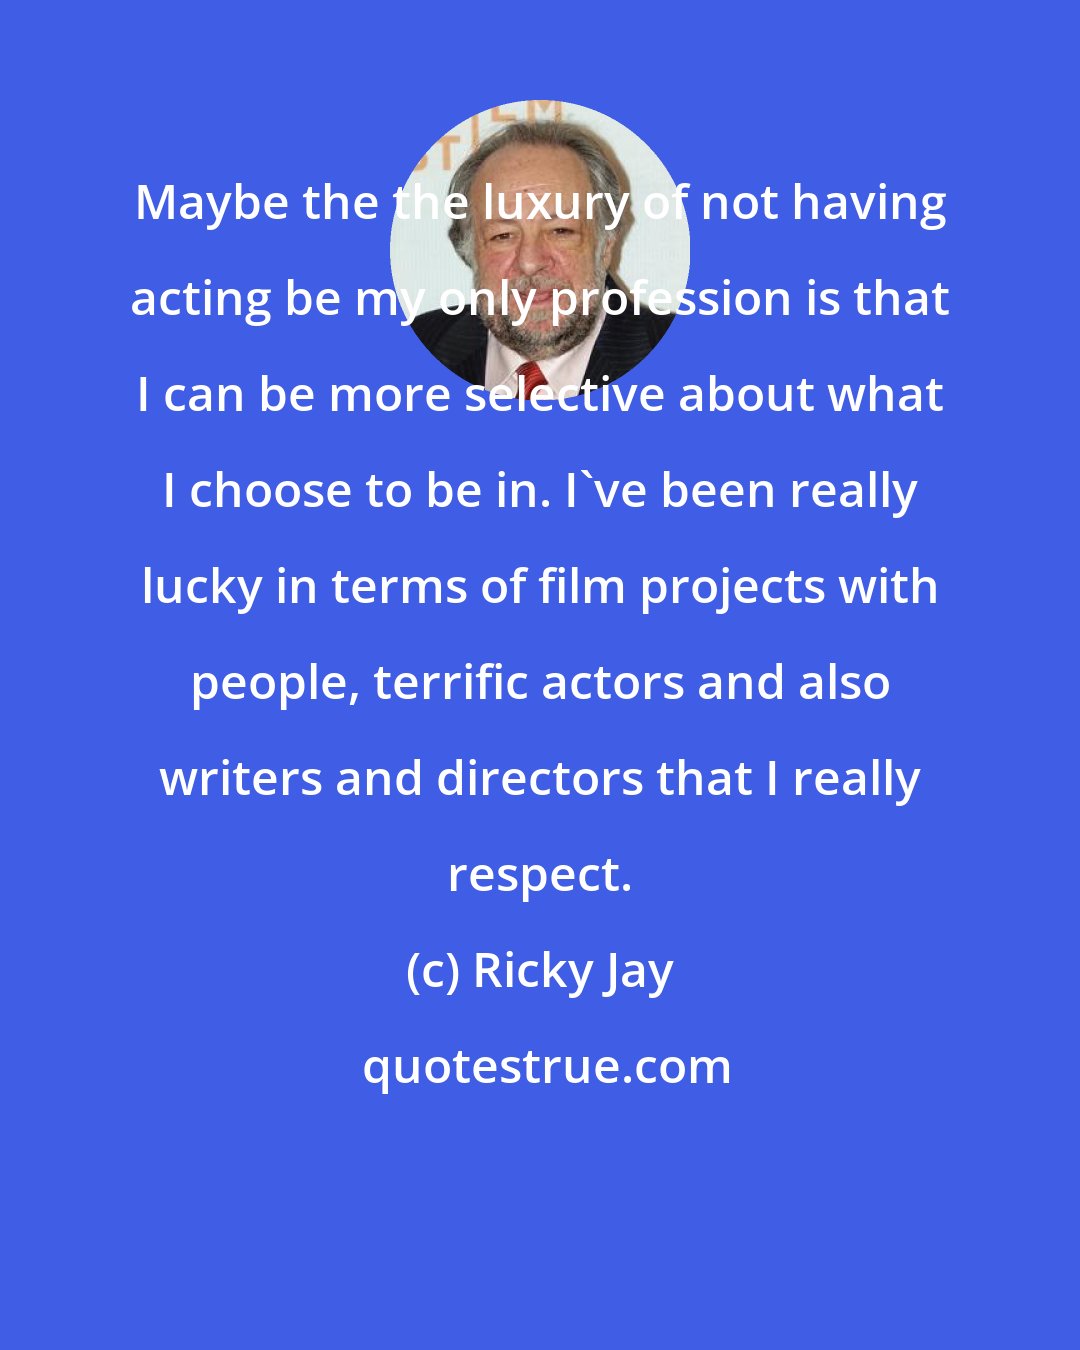 Ricky Jay: Maybe the the luxury of not having acting be my only profession is that I can be more selective about what I choose to be in. I've been really lucky in terms of film projects with people, terrific actors and also writers and directors that I really respect.